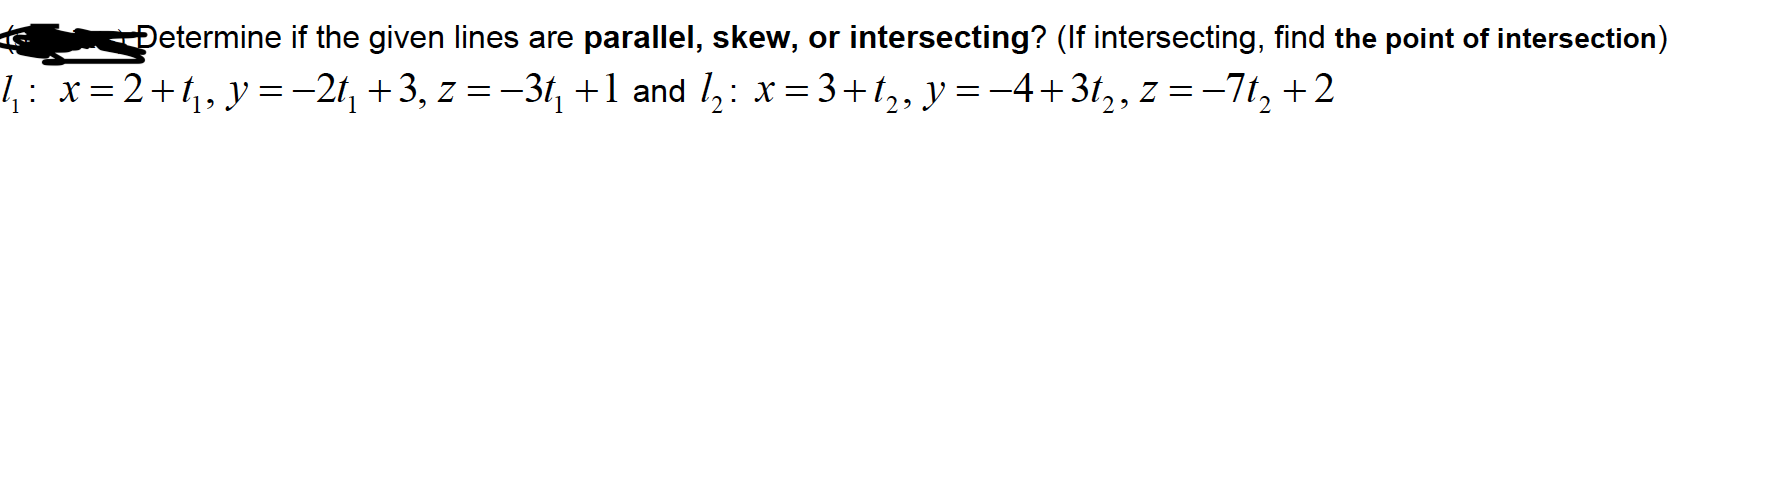 Determine if the given lines are parallel, skew, or intersecting? (If intersecting, find the point of intersection)
1: x=2+t4,y=-2t, +3, z = -3t, +1 and l,: x= 3+t,, y=-4+3t,, z =-7t, +2
